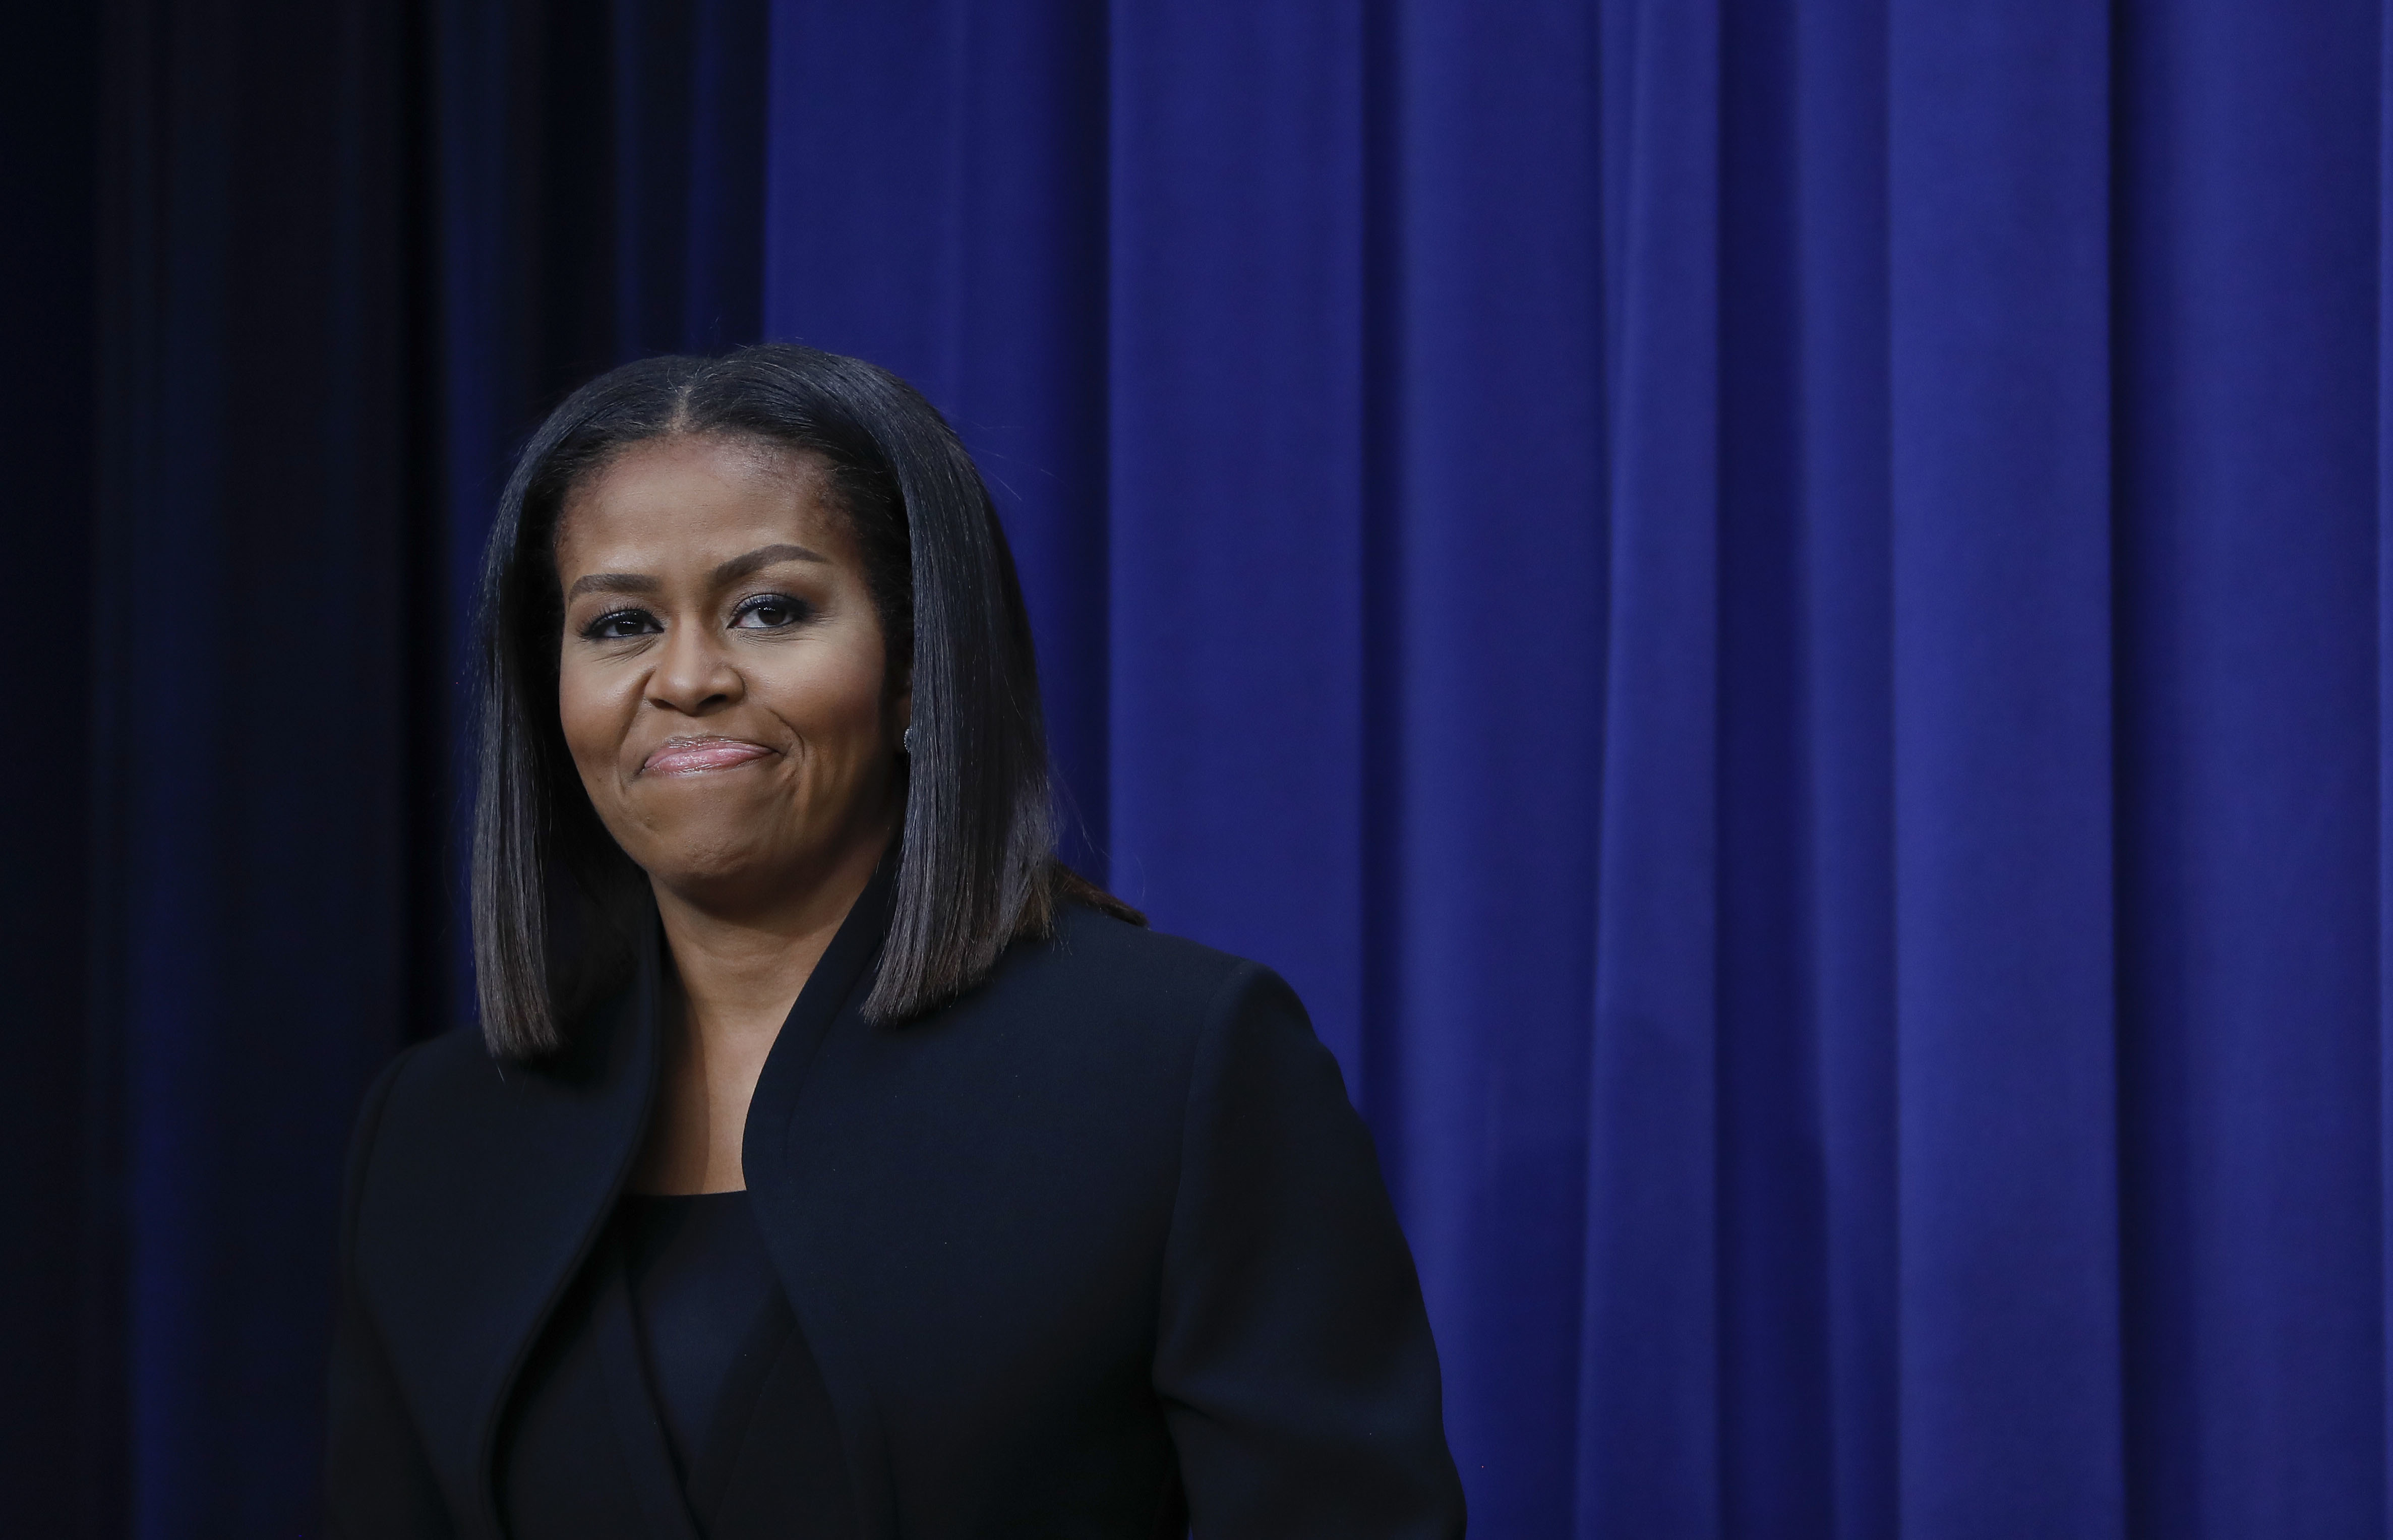 Michelle Obama speaks after the screening for the movie 'Hidden Figures,' in the White House, in Washington, on Dec. 15, 2016. (Pablo Martinez Monsivais—AP)